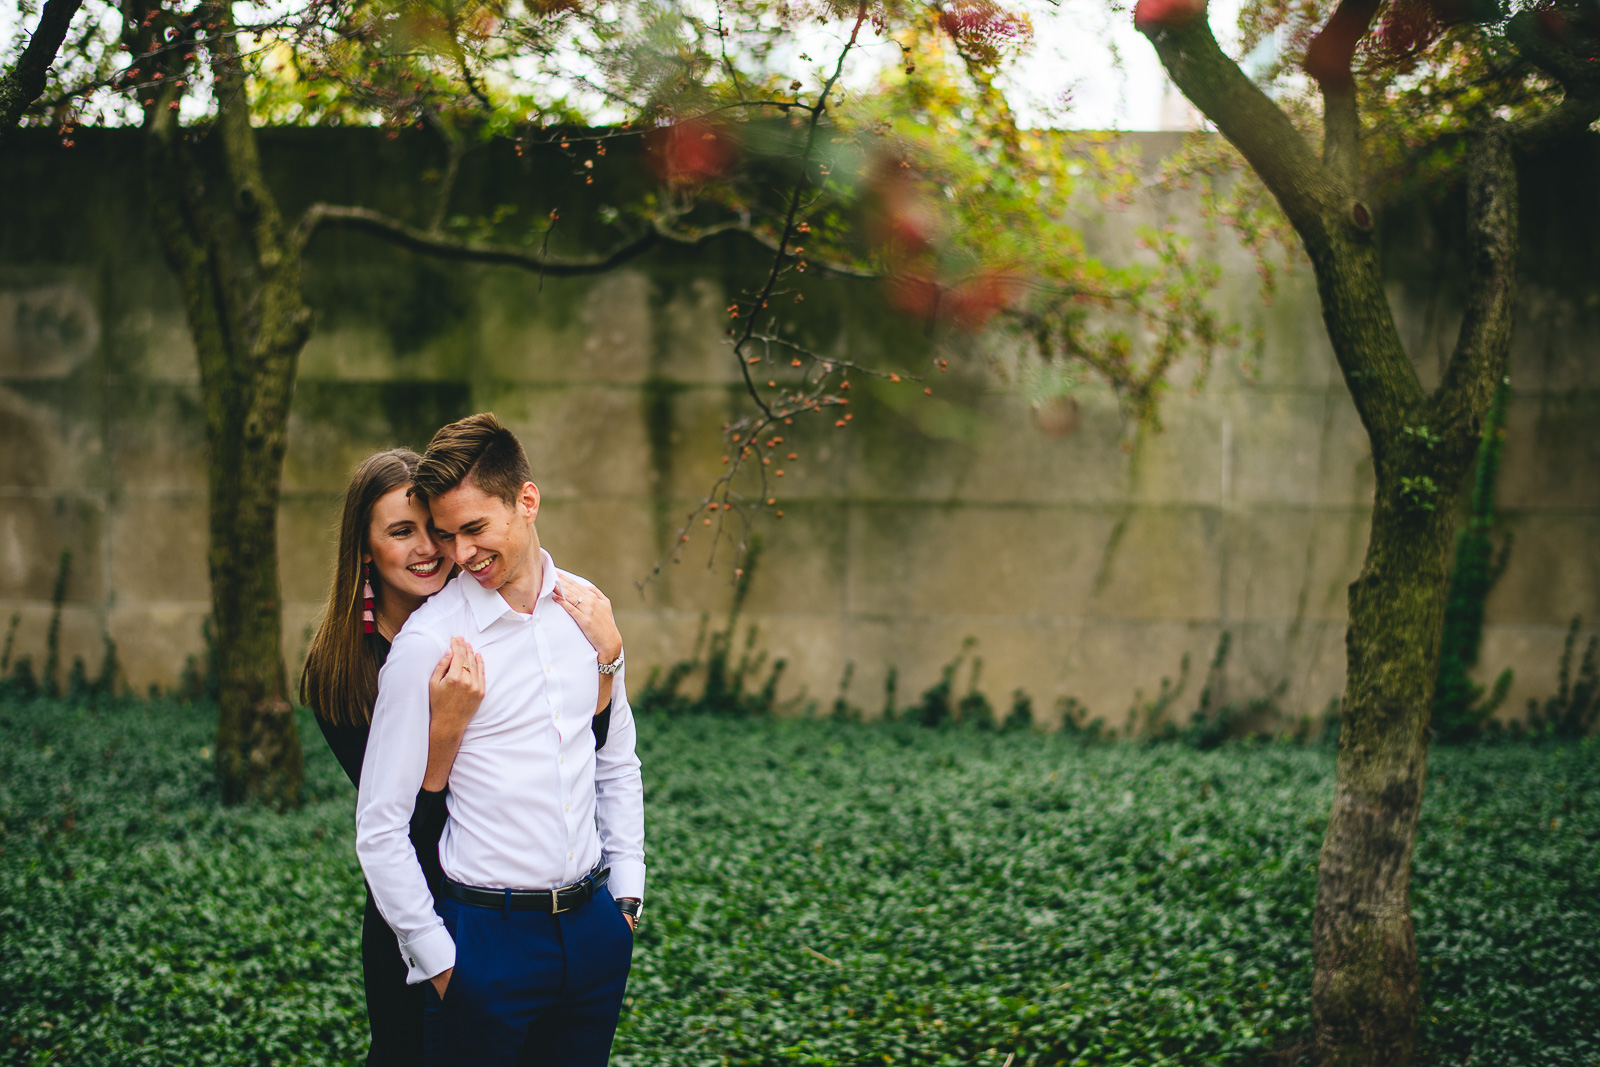 chicago fall engagement photos - Chicago Fall Engagement Photos // Marta + Kevin